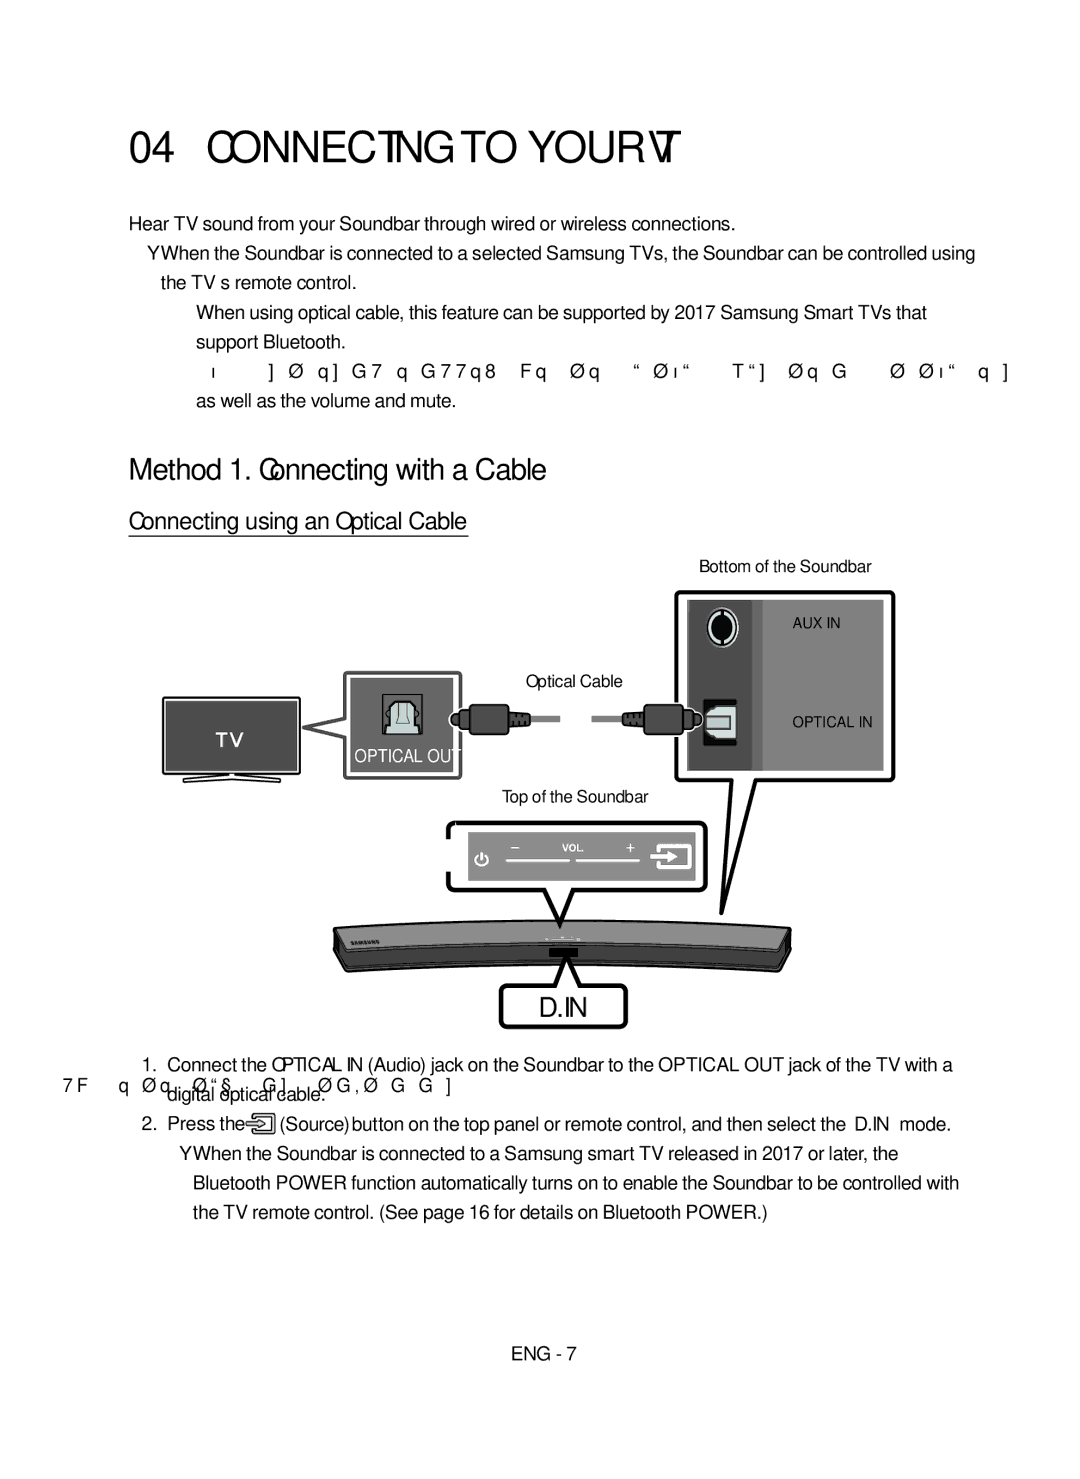 Samsung HW-M4500/EN manual Connecting to your TV, Method 1. Connecting with a Cable, Connecting using an Optical Cable 